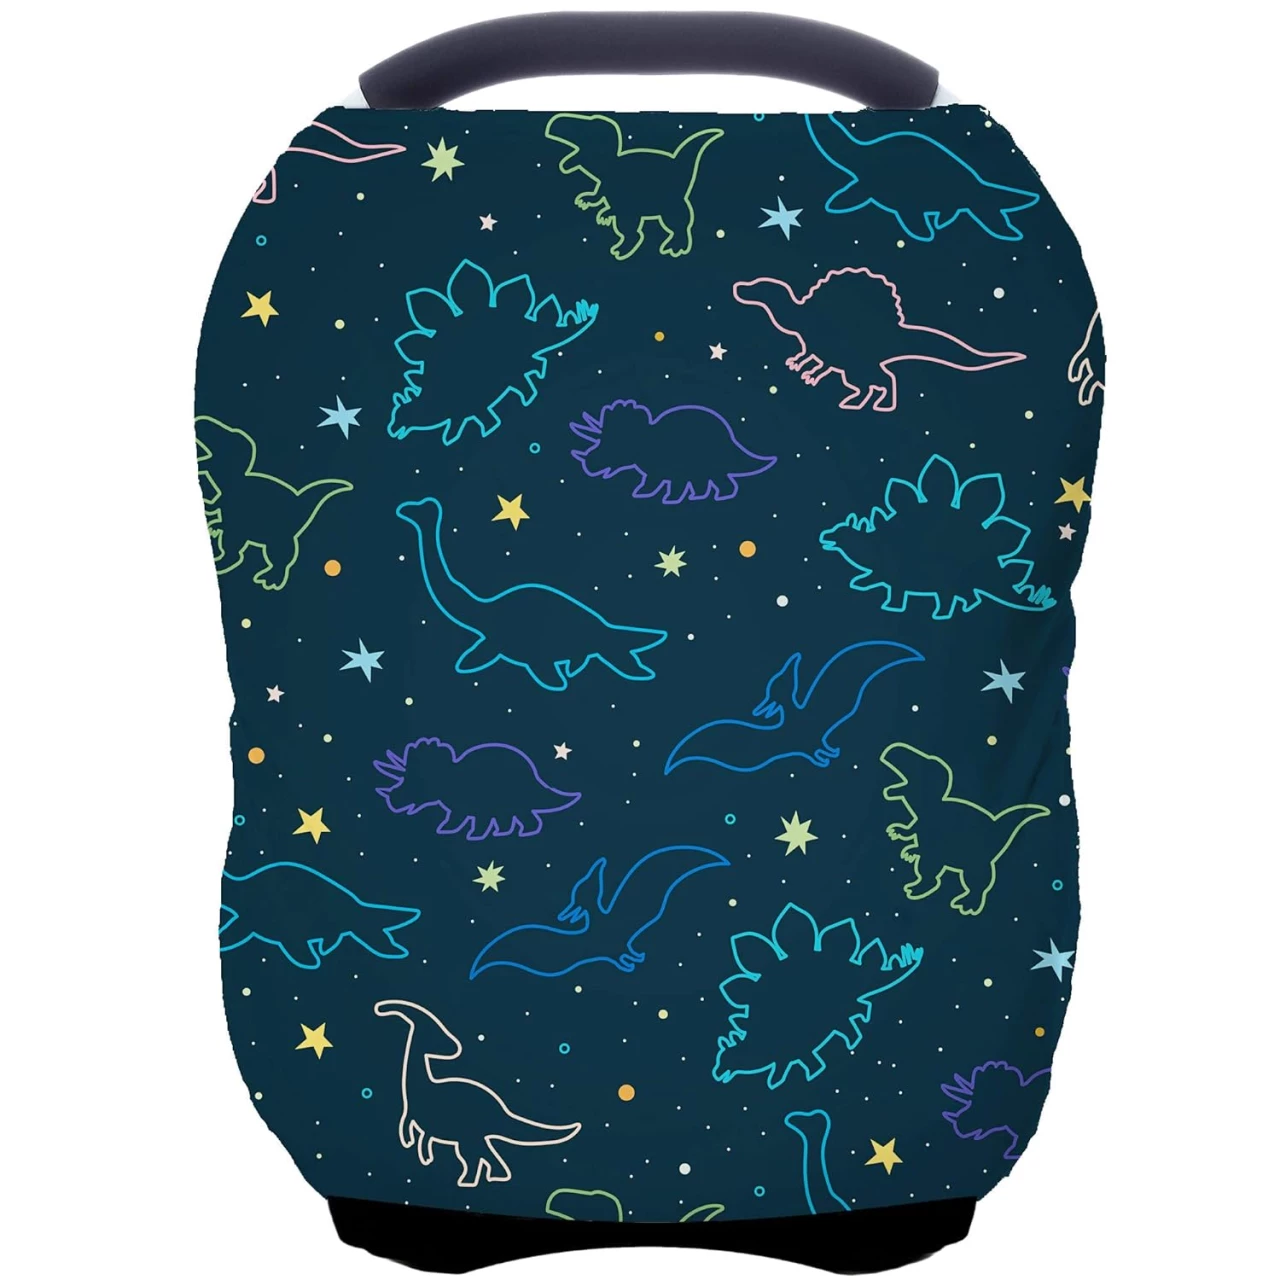 Car Seat Covers Canopy Cover - Multi-use Cover Carseat Canopy, Breathable Breastfeeding Cover, Car Seat Covers for Bbies, Boys &amp; Girls Shower Gifts (Dark Blue Dinosaur)